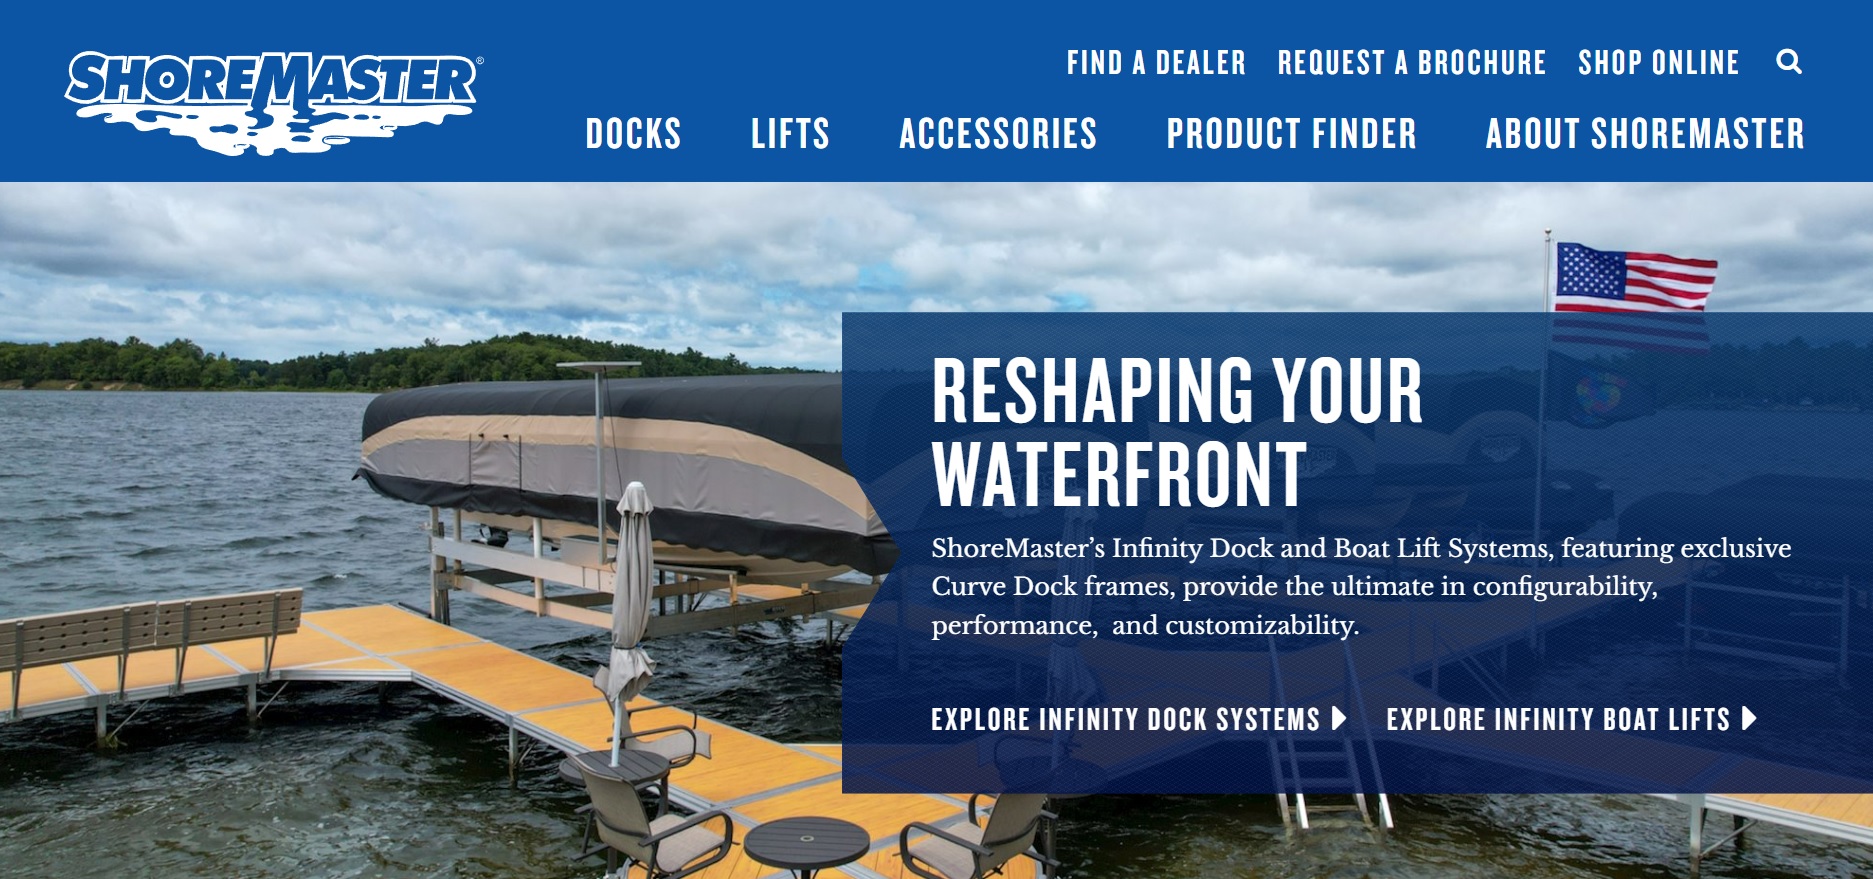 Lead Generation Strategies for Boat Lift and Dock Companies